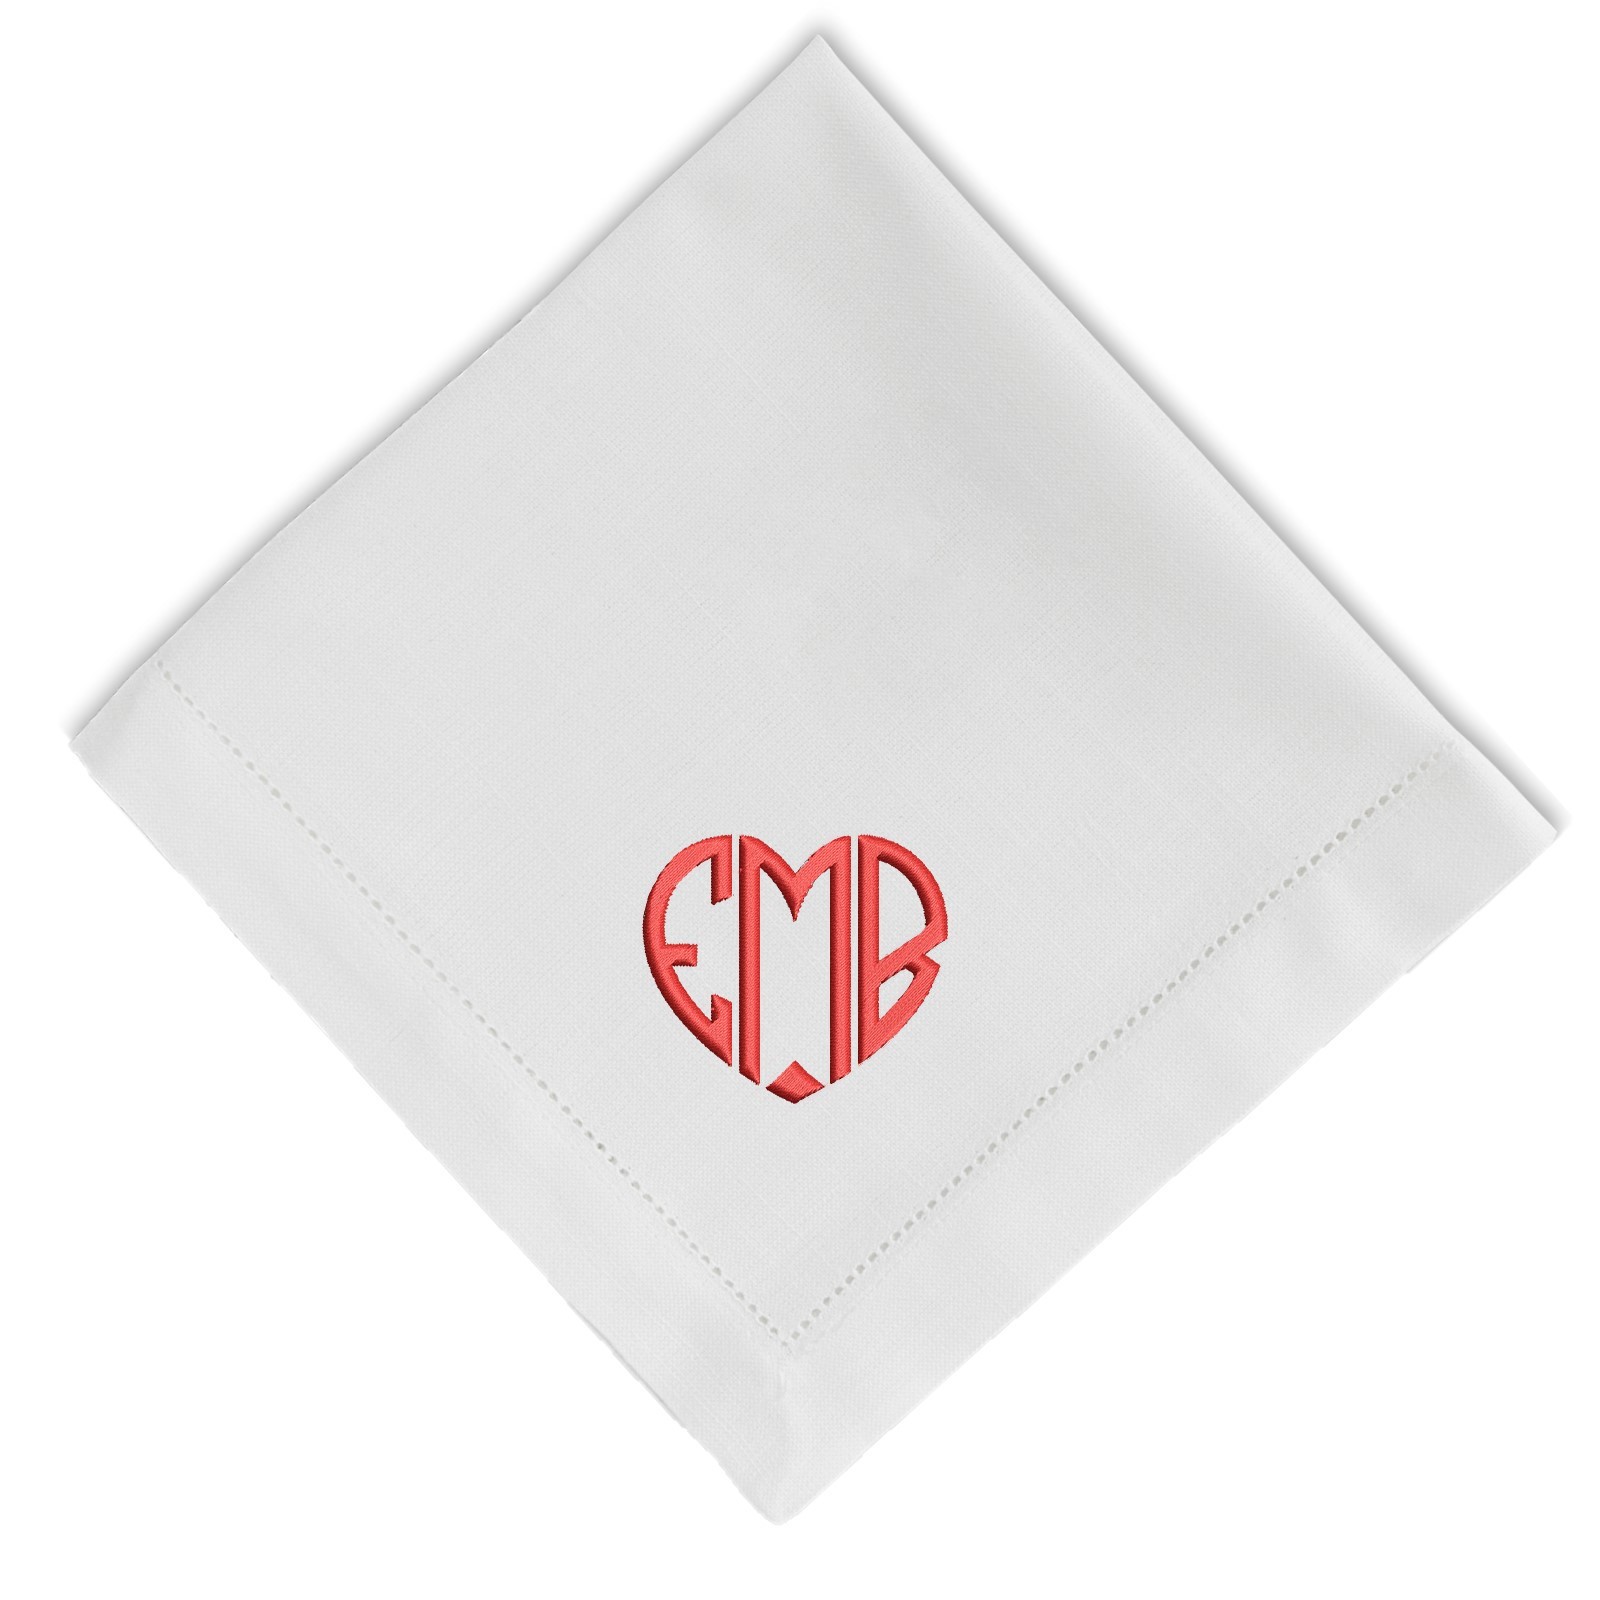  Muka Personalized Embroidered Letter Cloth Dinner Napkins  Cotton Thick with Hemstitched Mitered Corners Custom White Linen Napkin for  Wedding Dinner Gift-V-14X14: Home & Kitchen